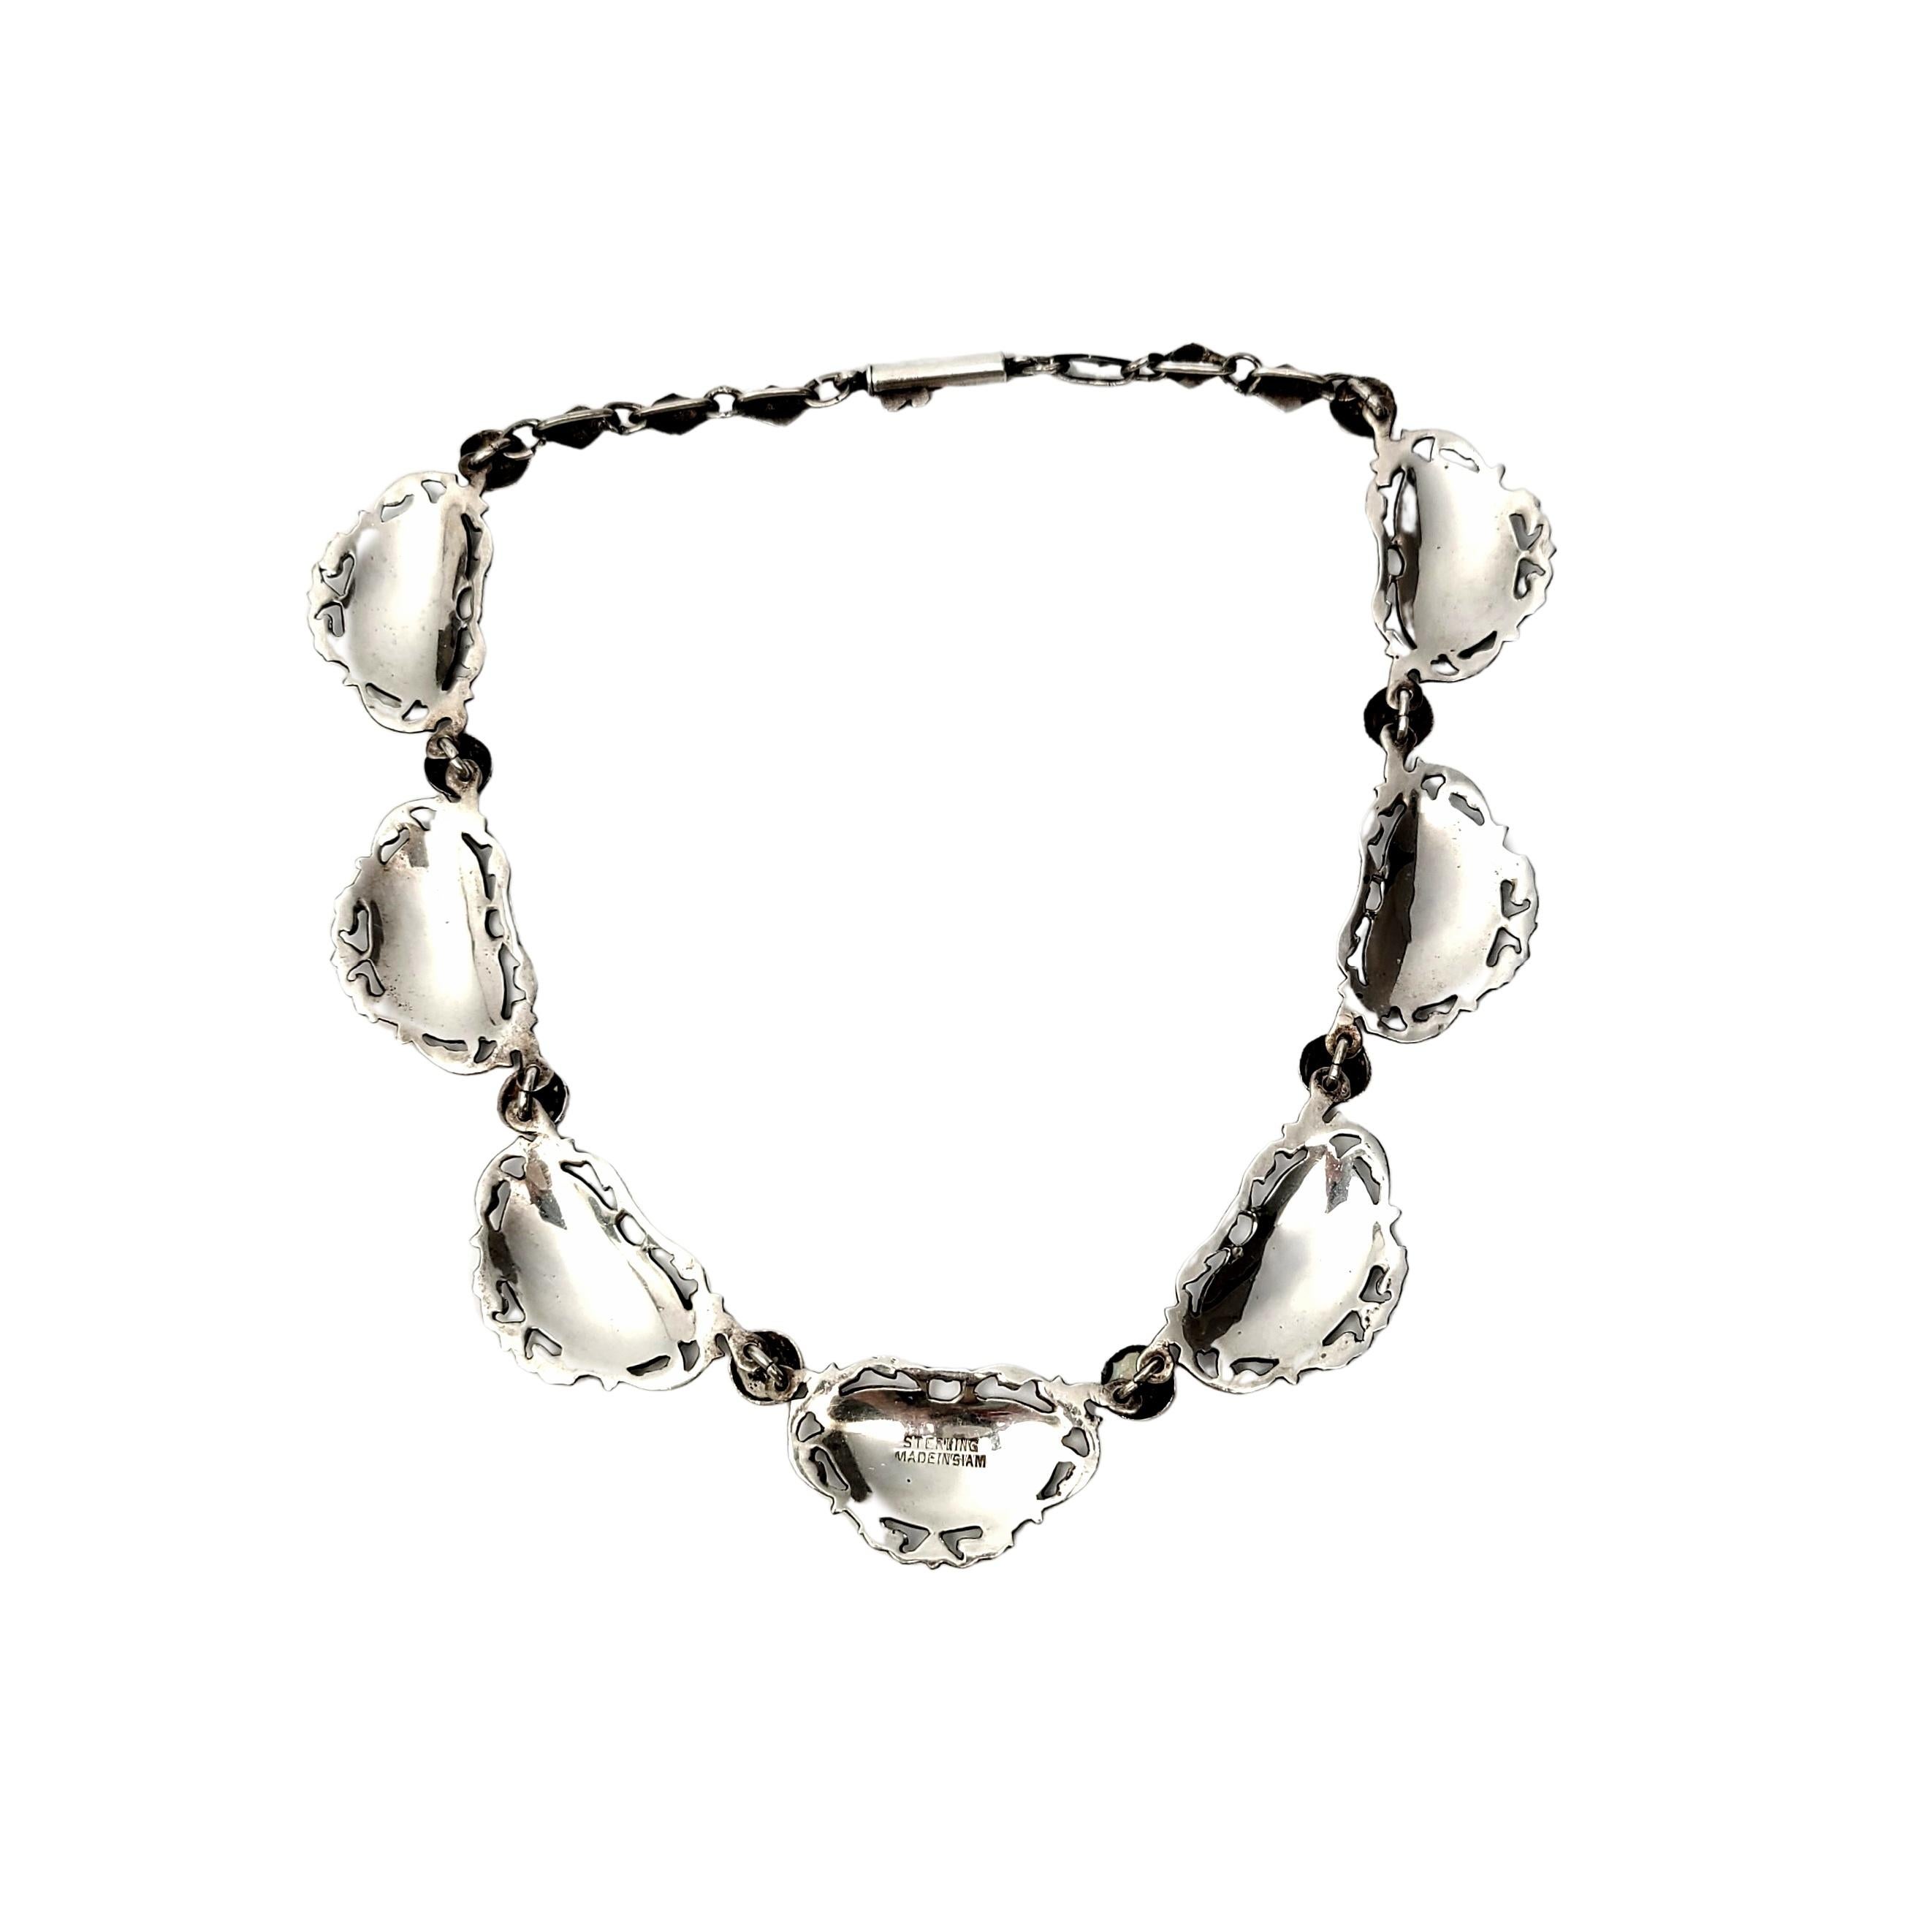 Siam sterling silver and niello enamel choker necklace.

Beautifully ornate black niello enamel with etched Hindi goddess dancer links alternate with round silver and niello connectors. Open scroll work frames each goddess link. Diamond shaped